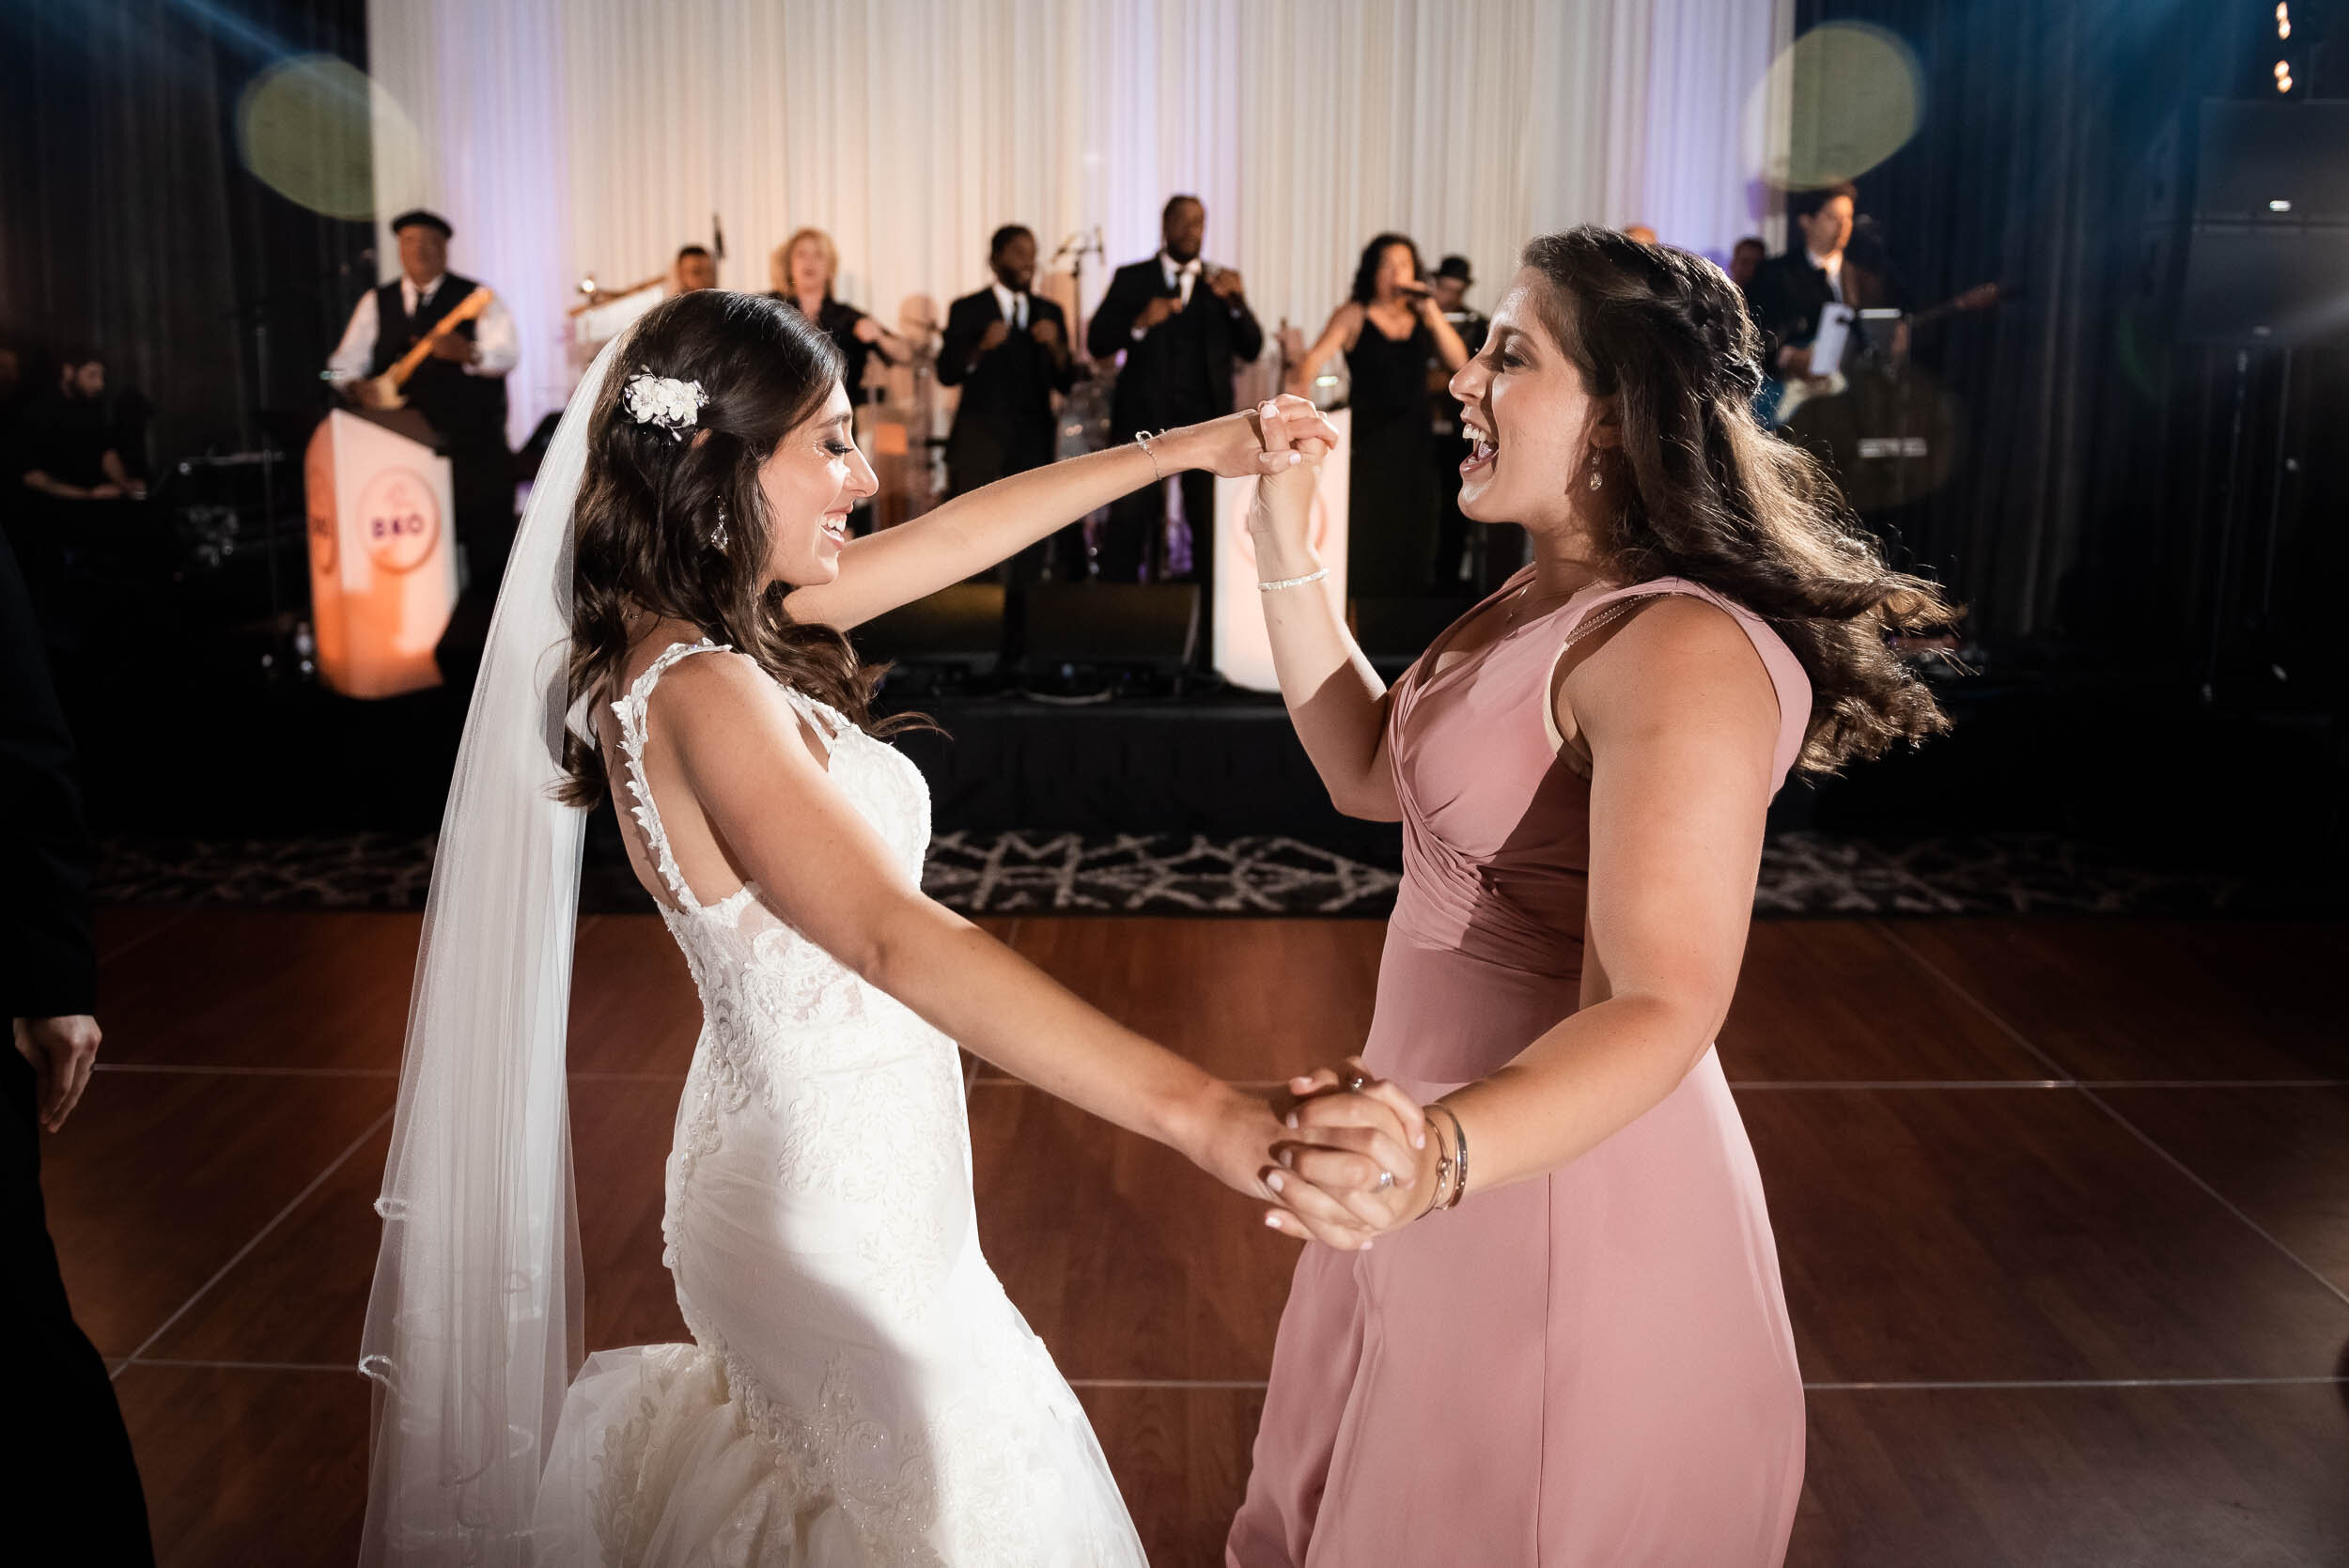 Bride and bridesmaid dancing: Loews Chicago Hotel Wedding captured by J. Brown Photography